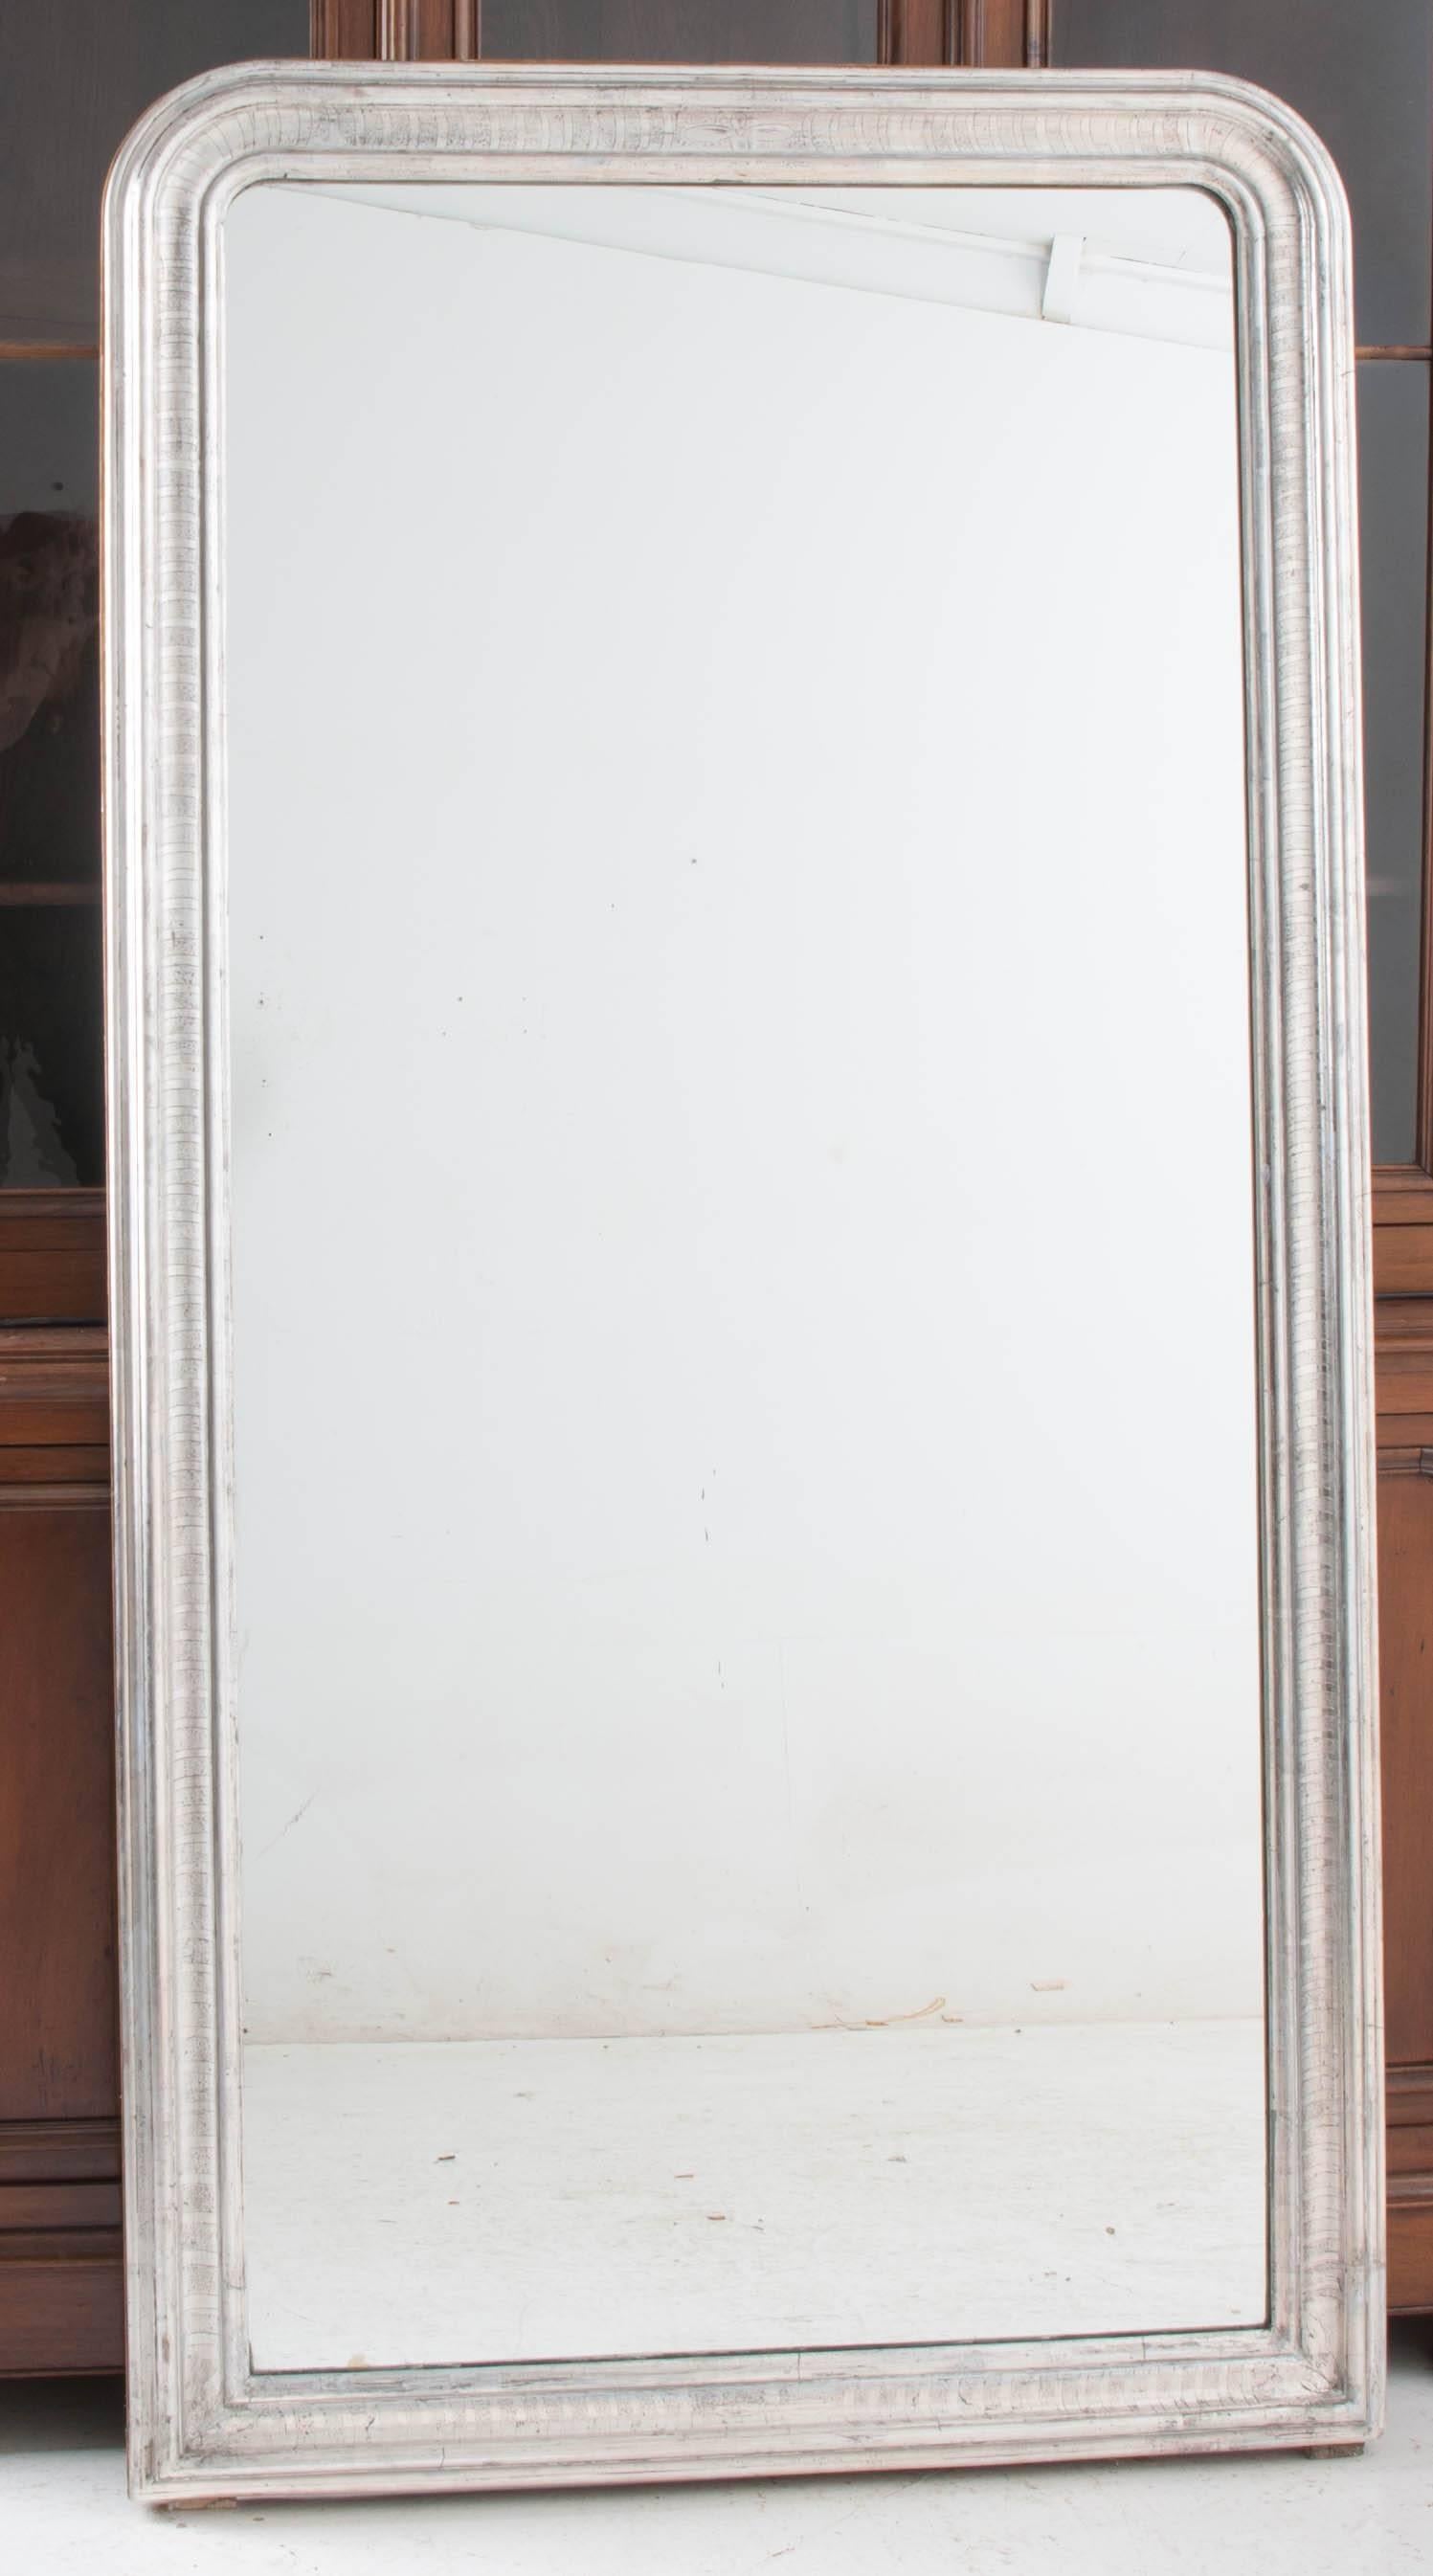 This spectacular Louis Philippe silver gilt mirror is tall enough to make a fabulous floor mirror and would also look wonderful hung on the wall. This mirror bears a striped motif and has new glass.